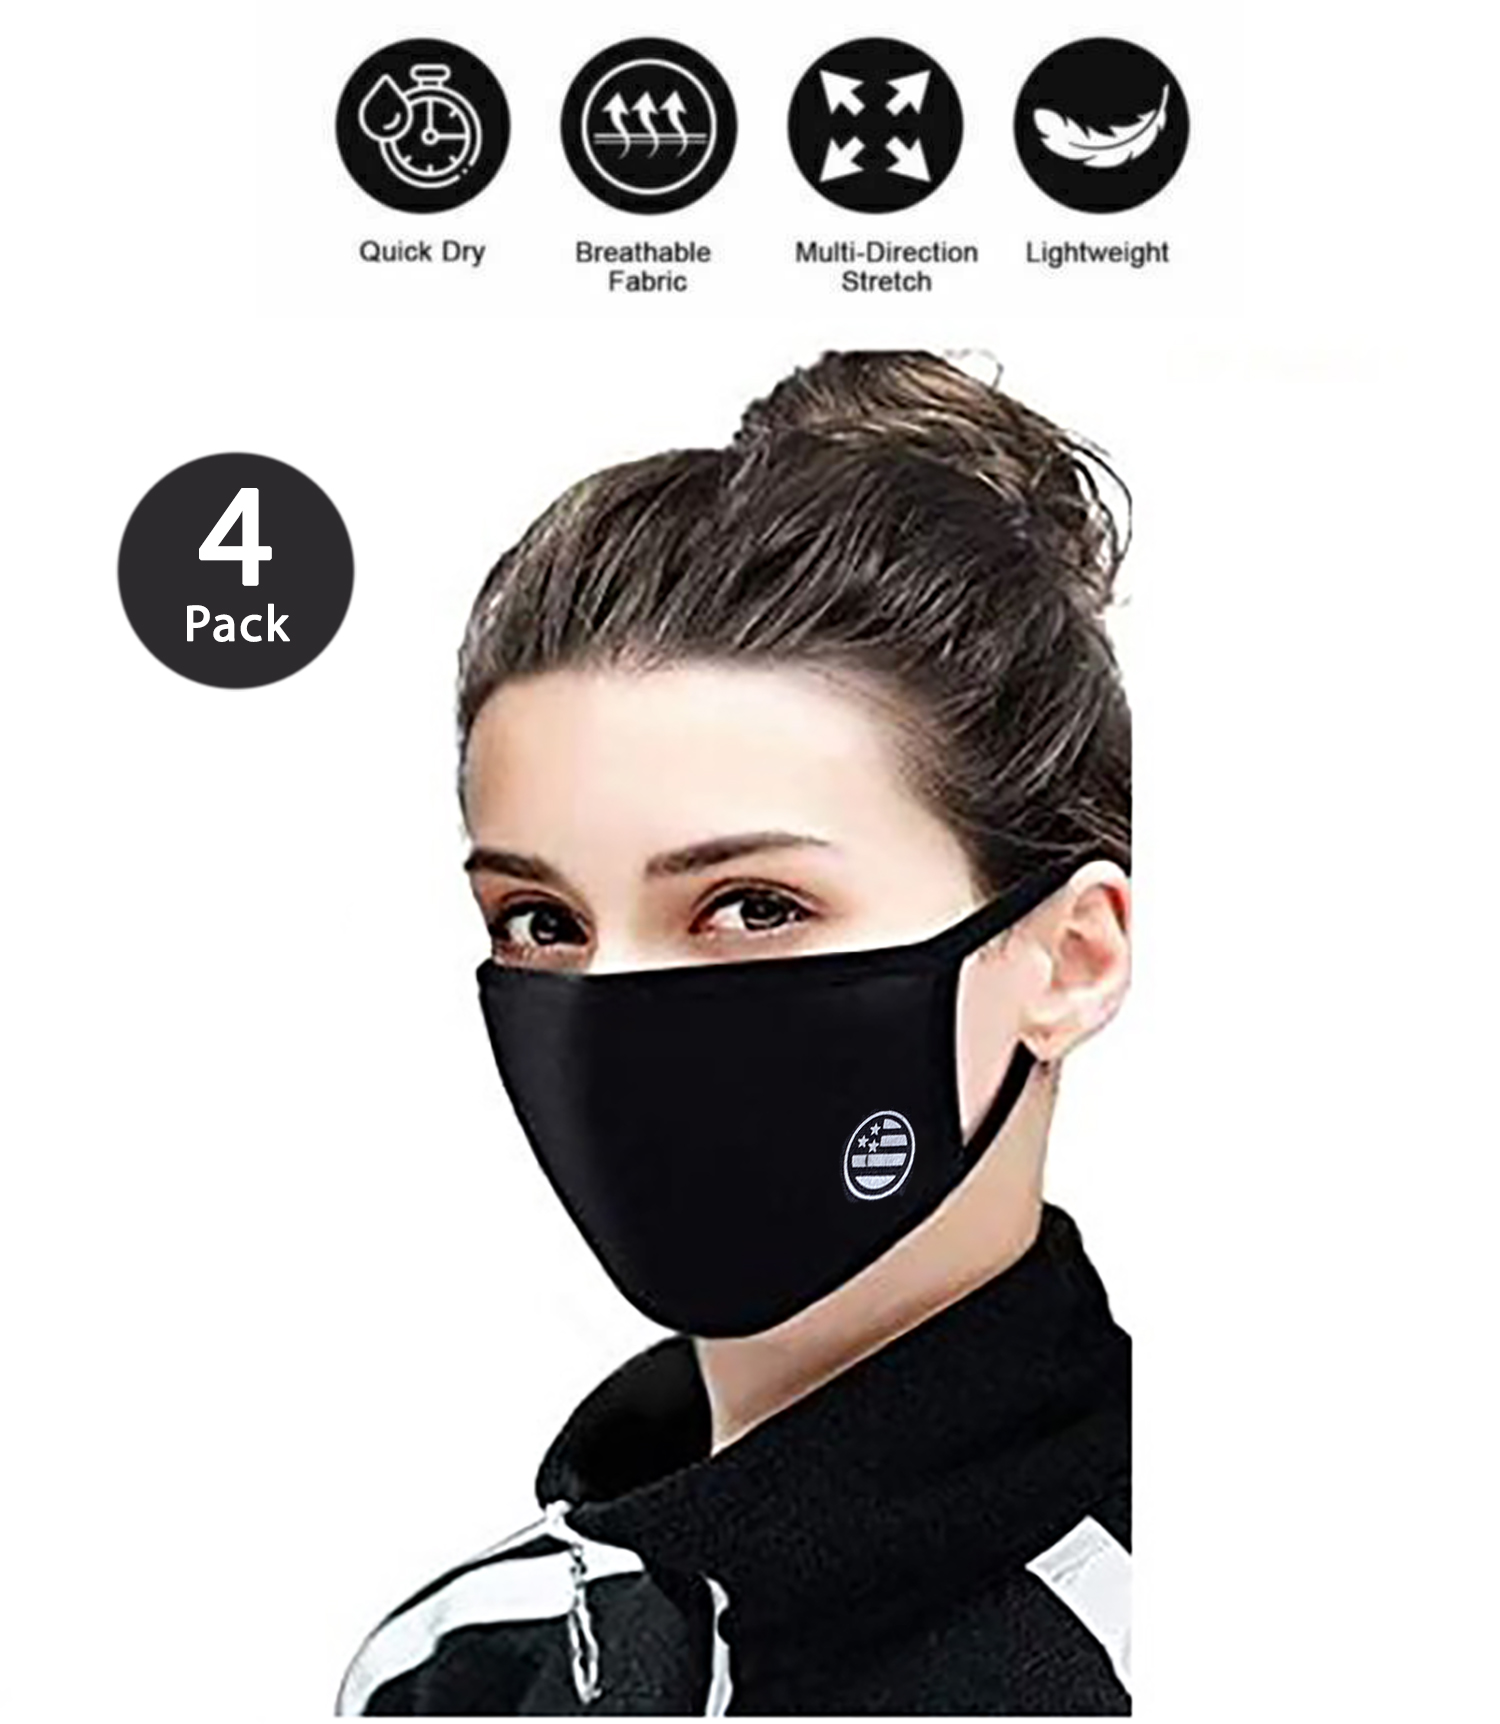 Soft Cotton Reusable Double Layer Washable Covering White Flag Men Women Unisex Black Adult Size Face Cover Mask 4 Pack - image 1 of 4